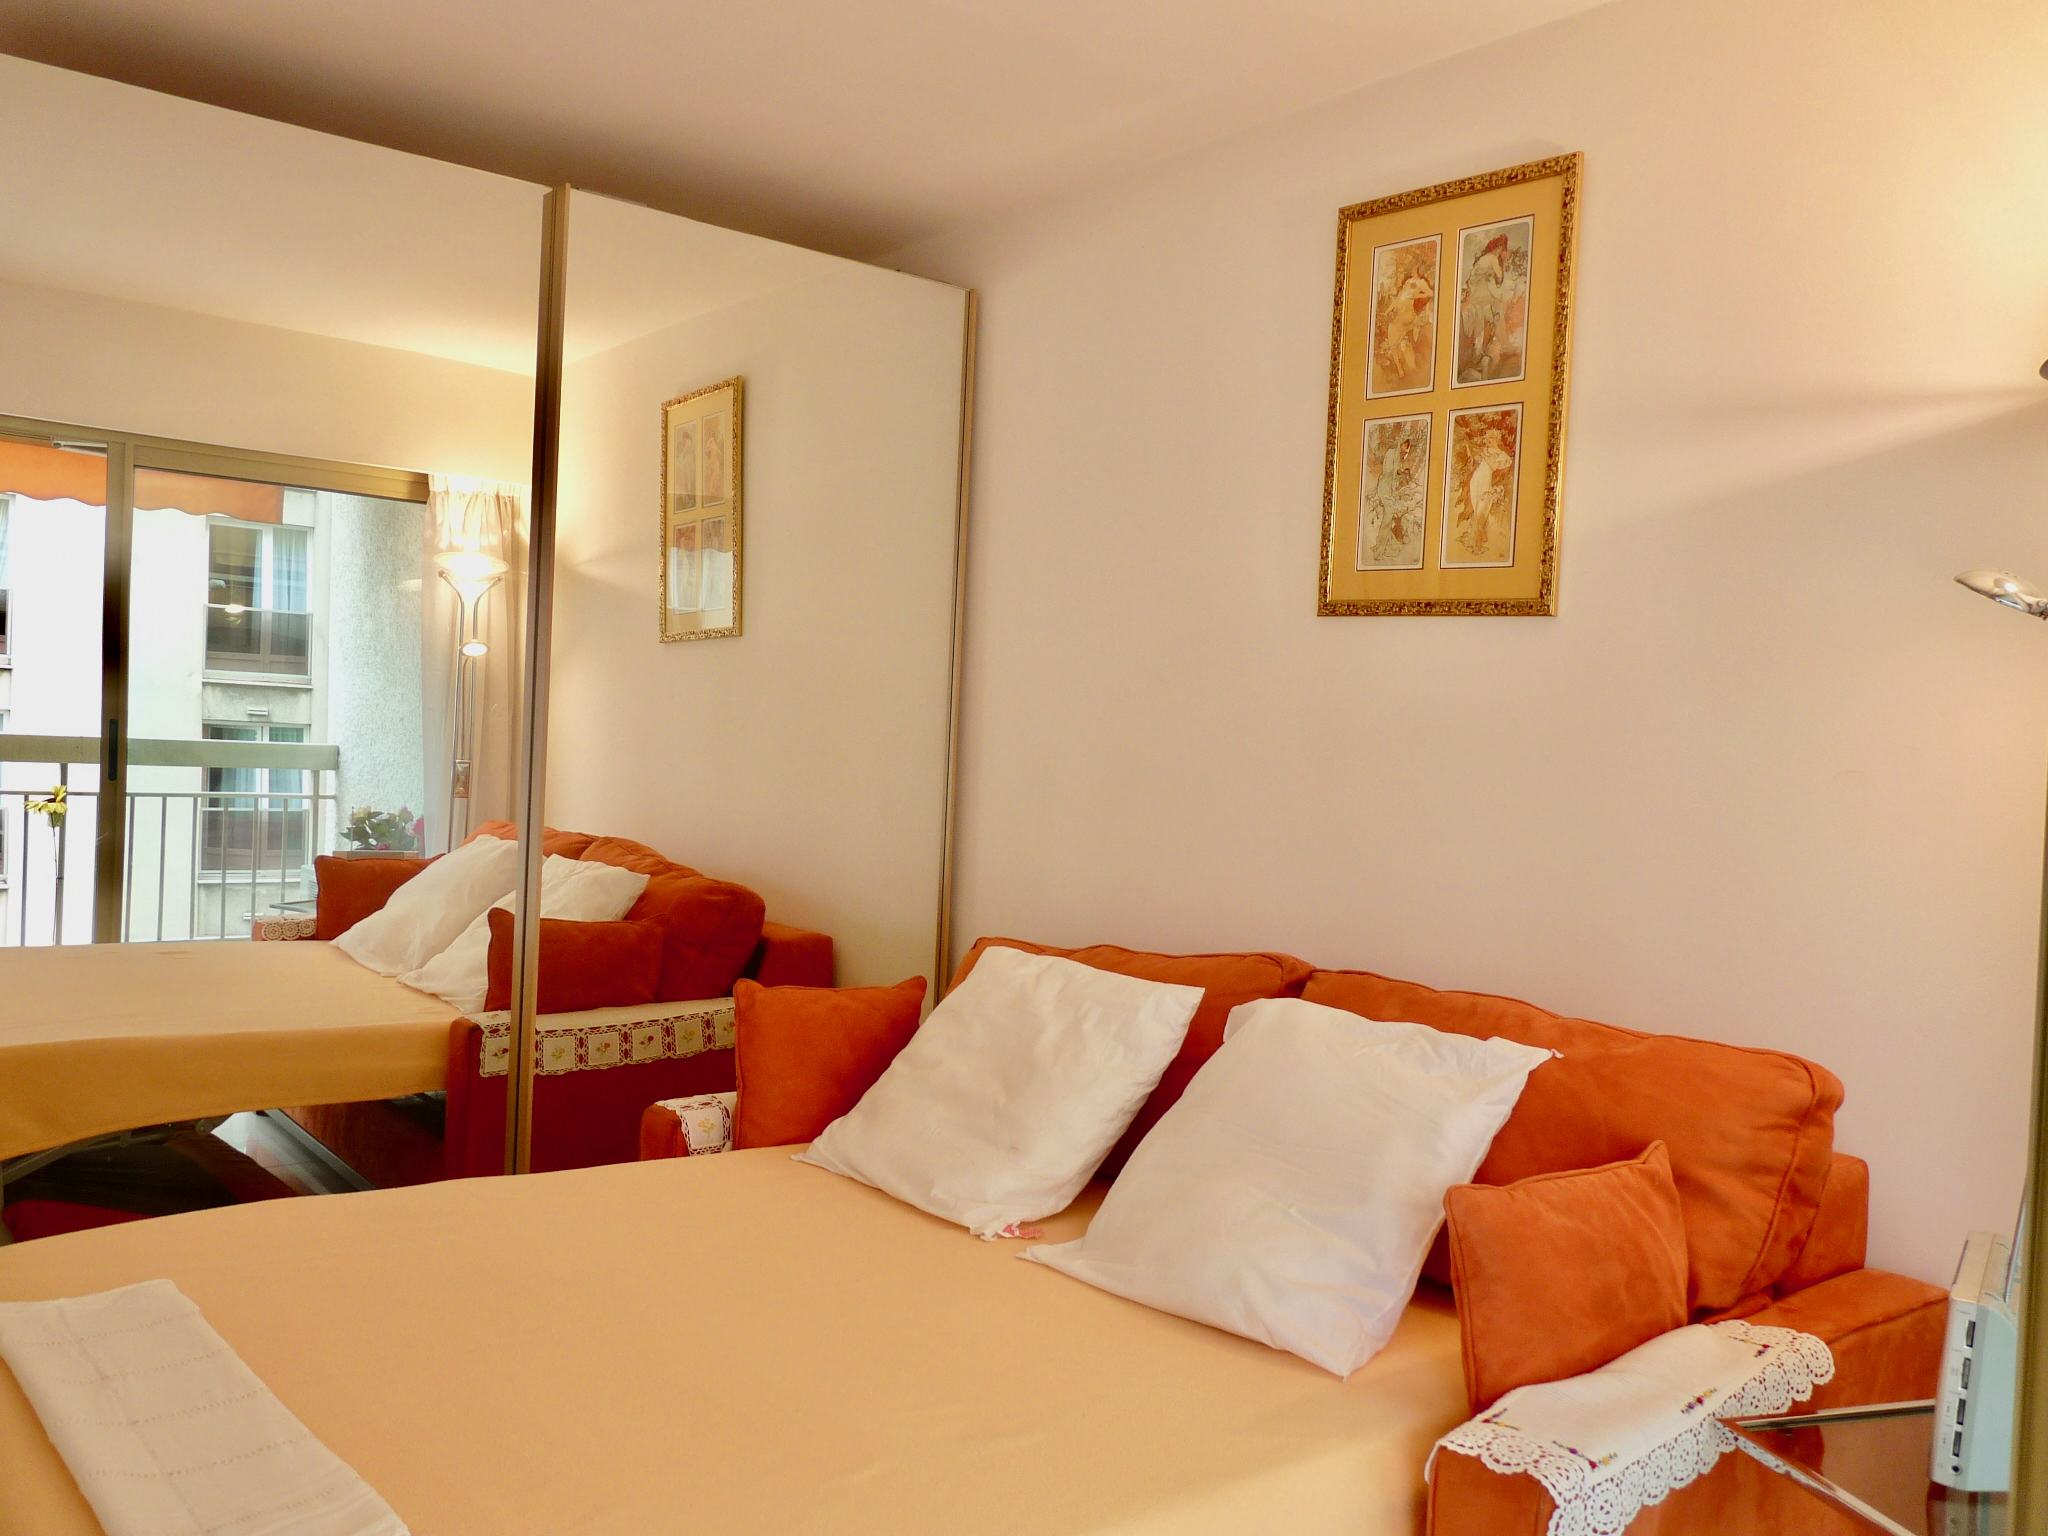 One bedroom apartment in the center of Cannes, next to the Carlton, a few meters from the Croisette - 367 3